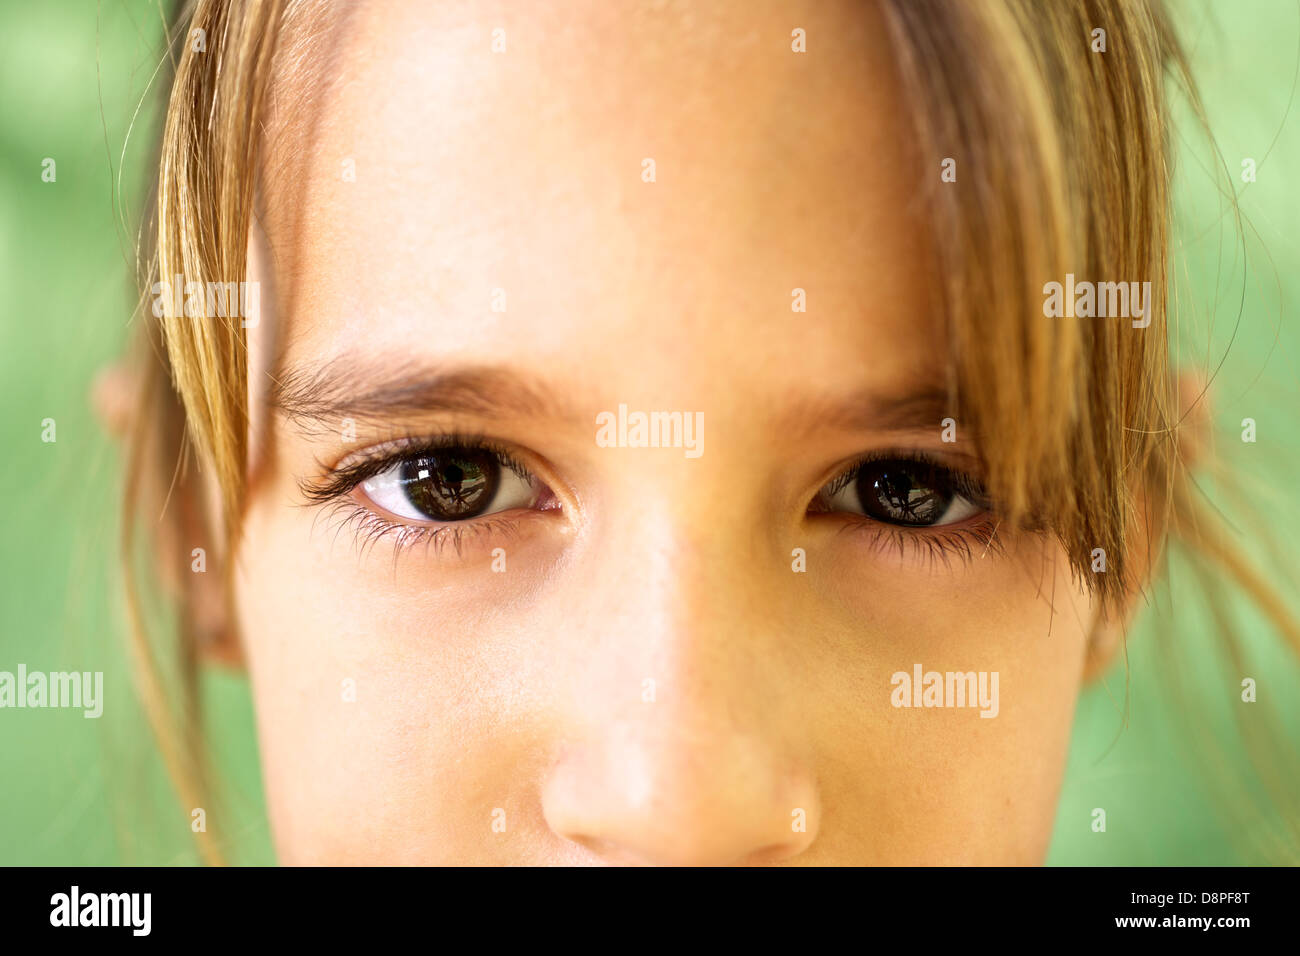 Young people and emotions, portrait of serious girl looking at camera. Closeup of eyes Stock Photo